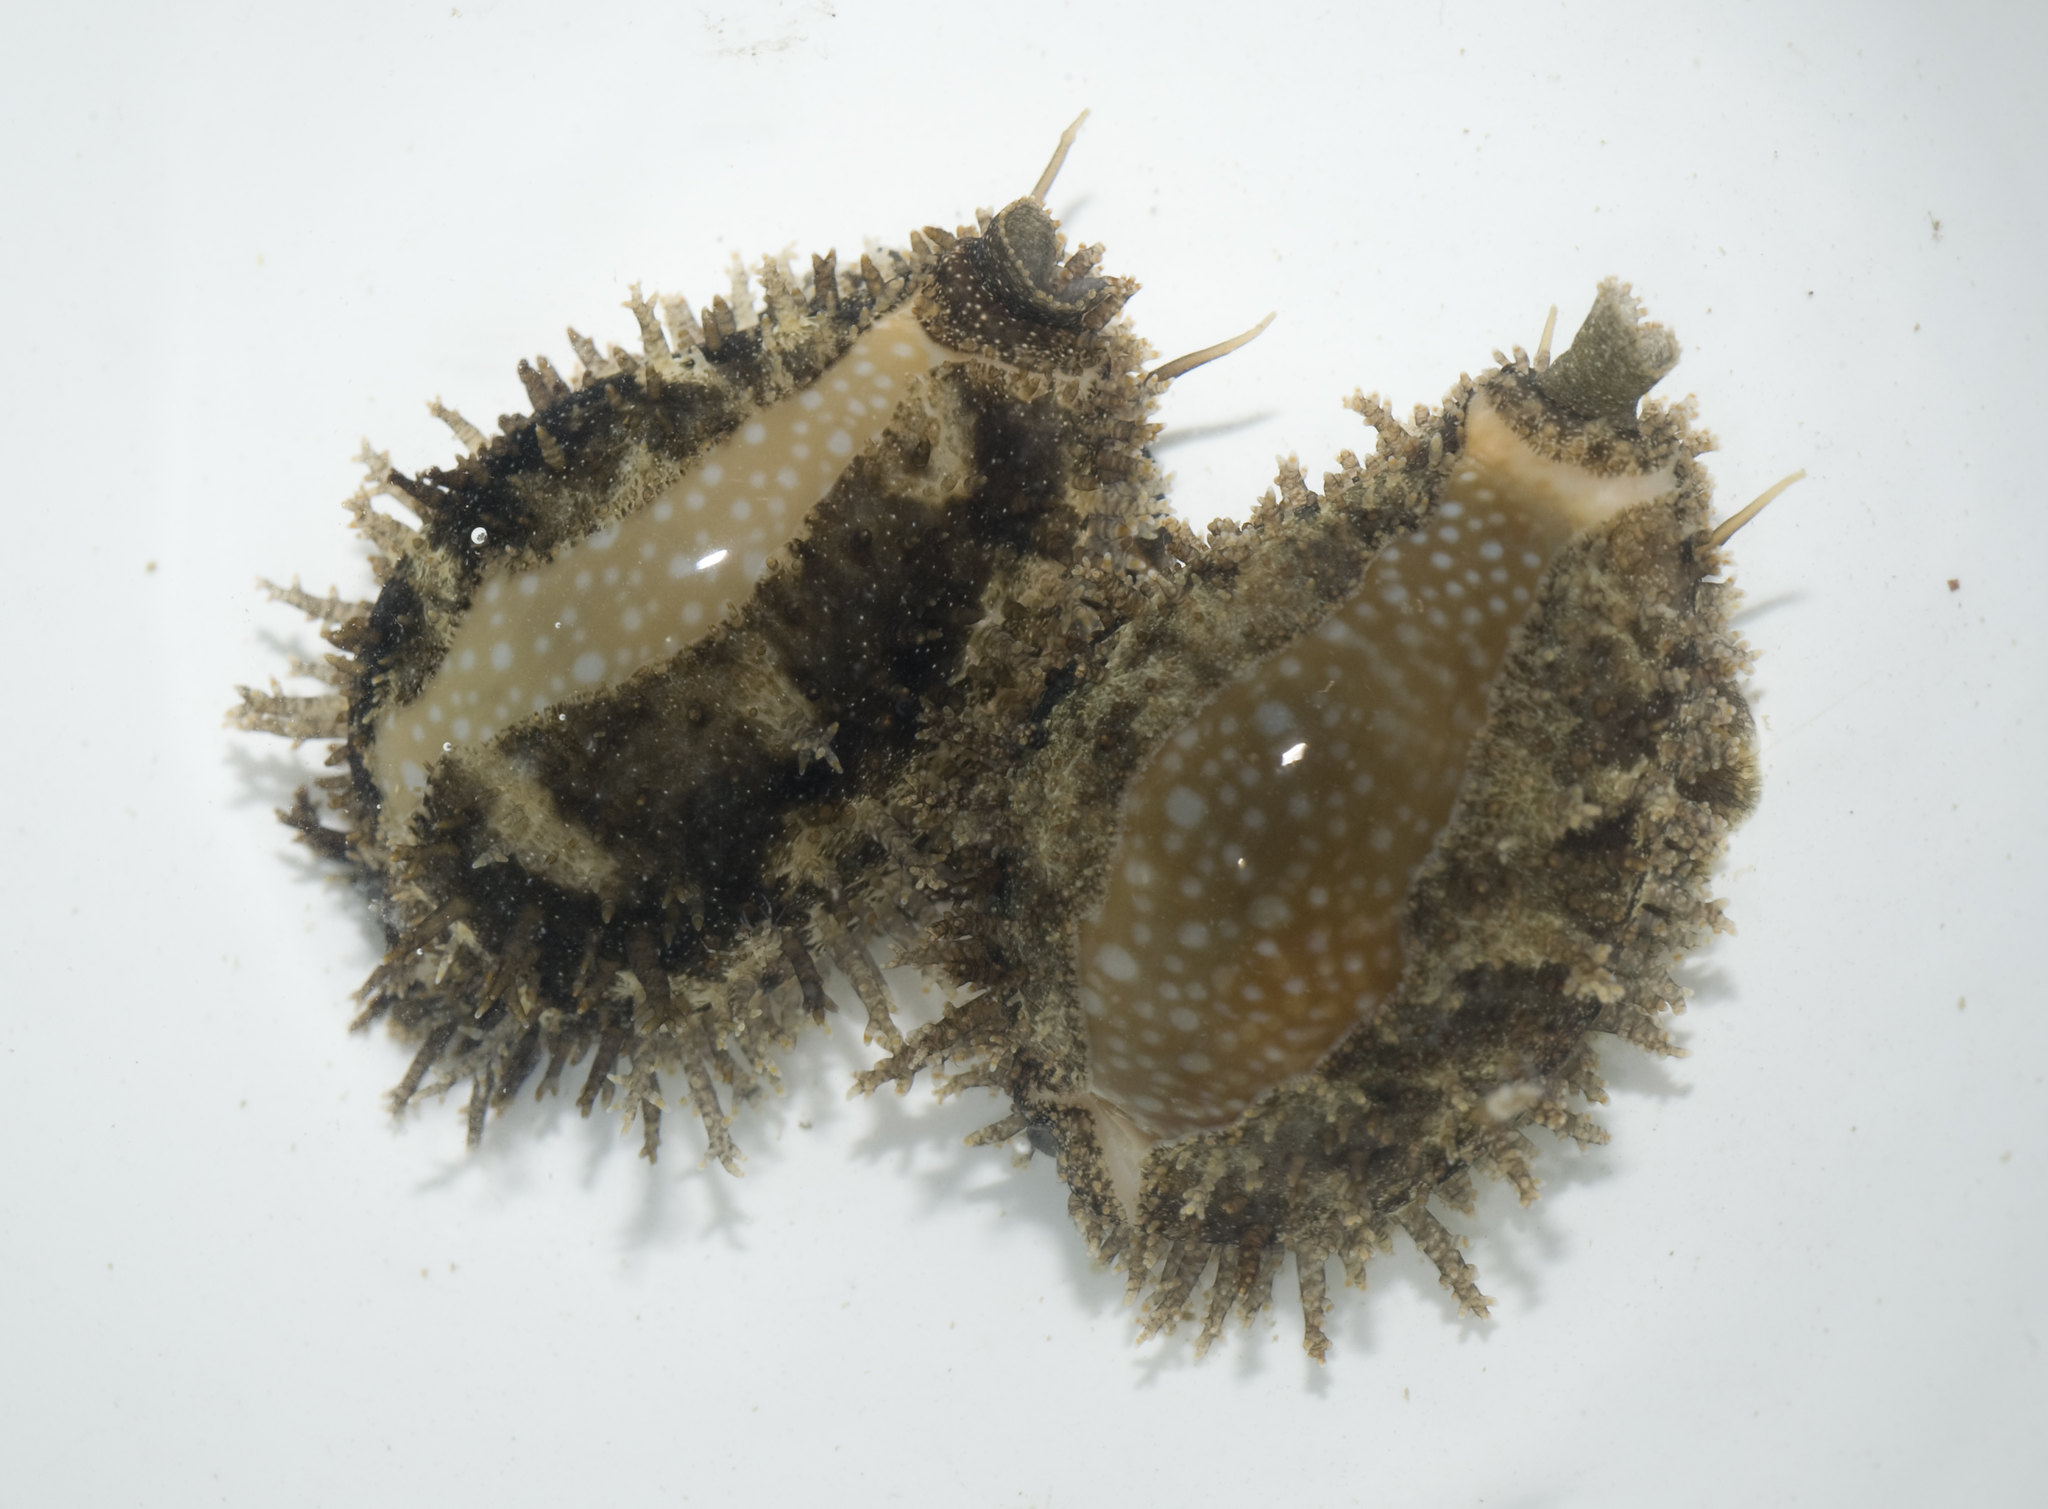 Photograph of two individuals of Naria miliaris cowries.